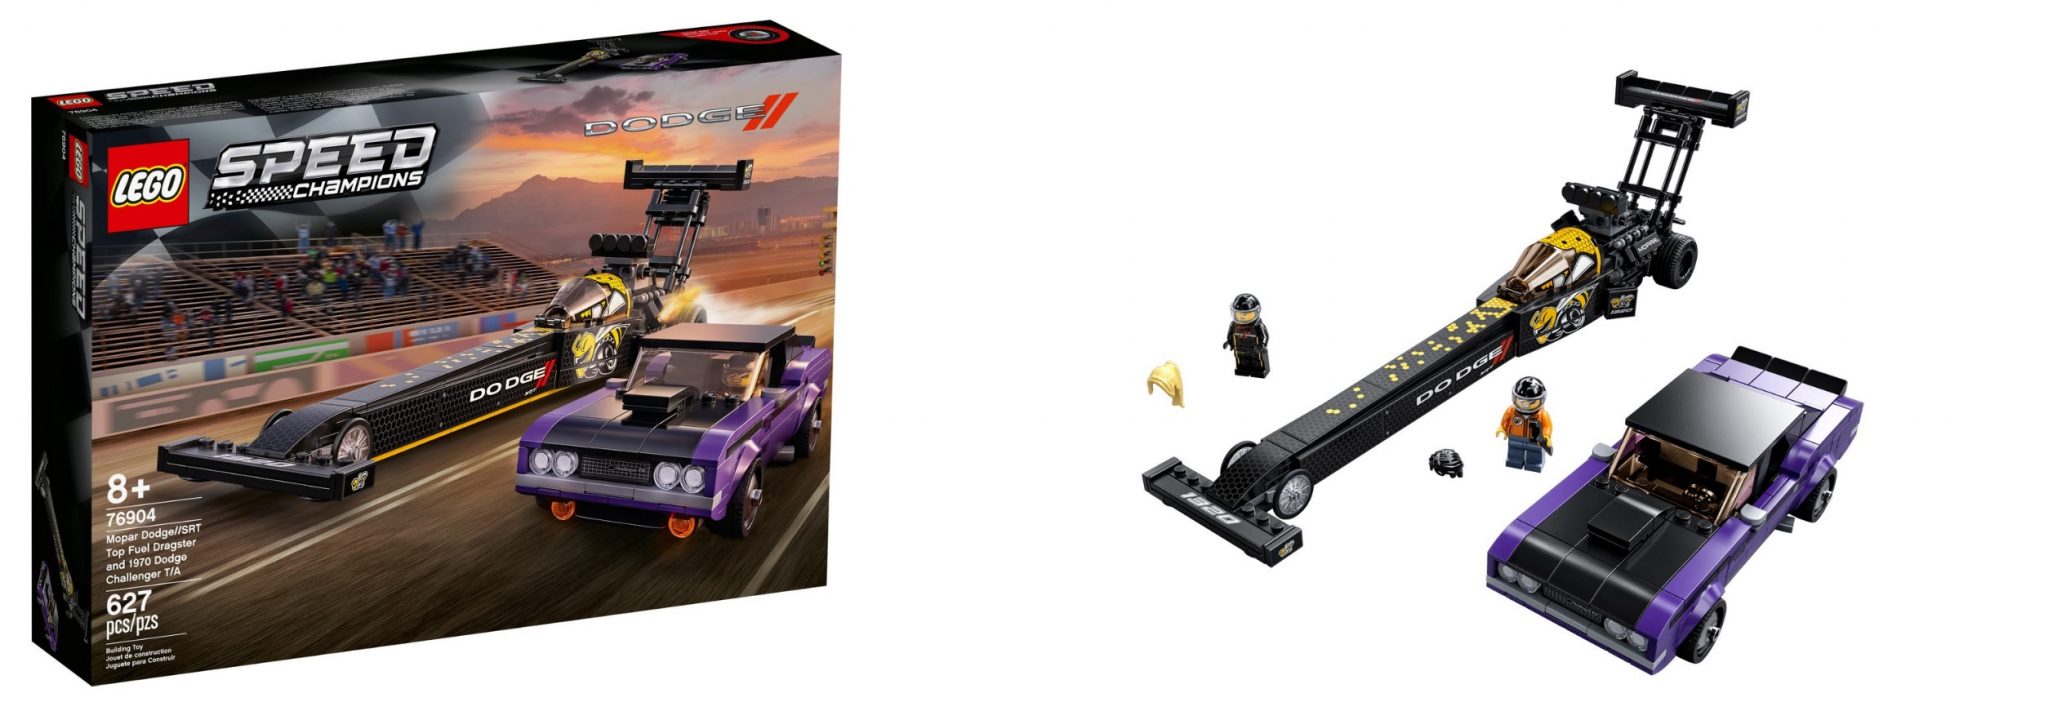 LEGO Speed Champions Summer 2021 Sets, Leaks, Images & Pricing (76900